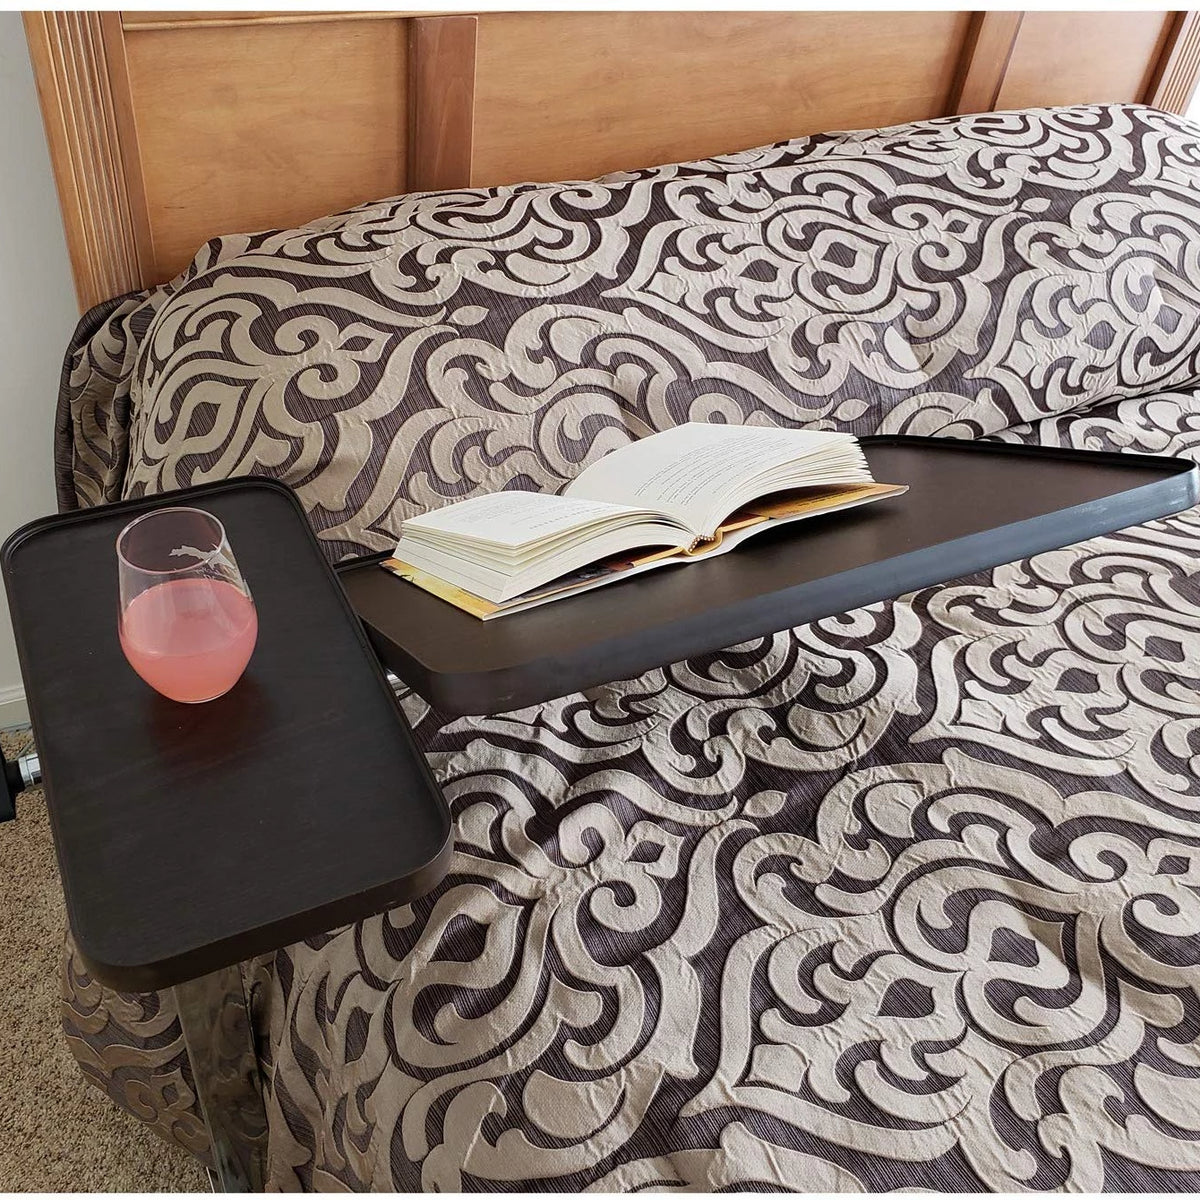 An overbed table over a bed with a book and drink on it